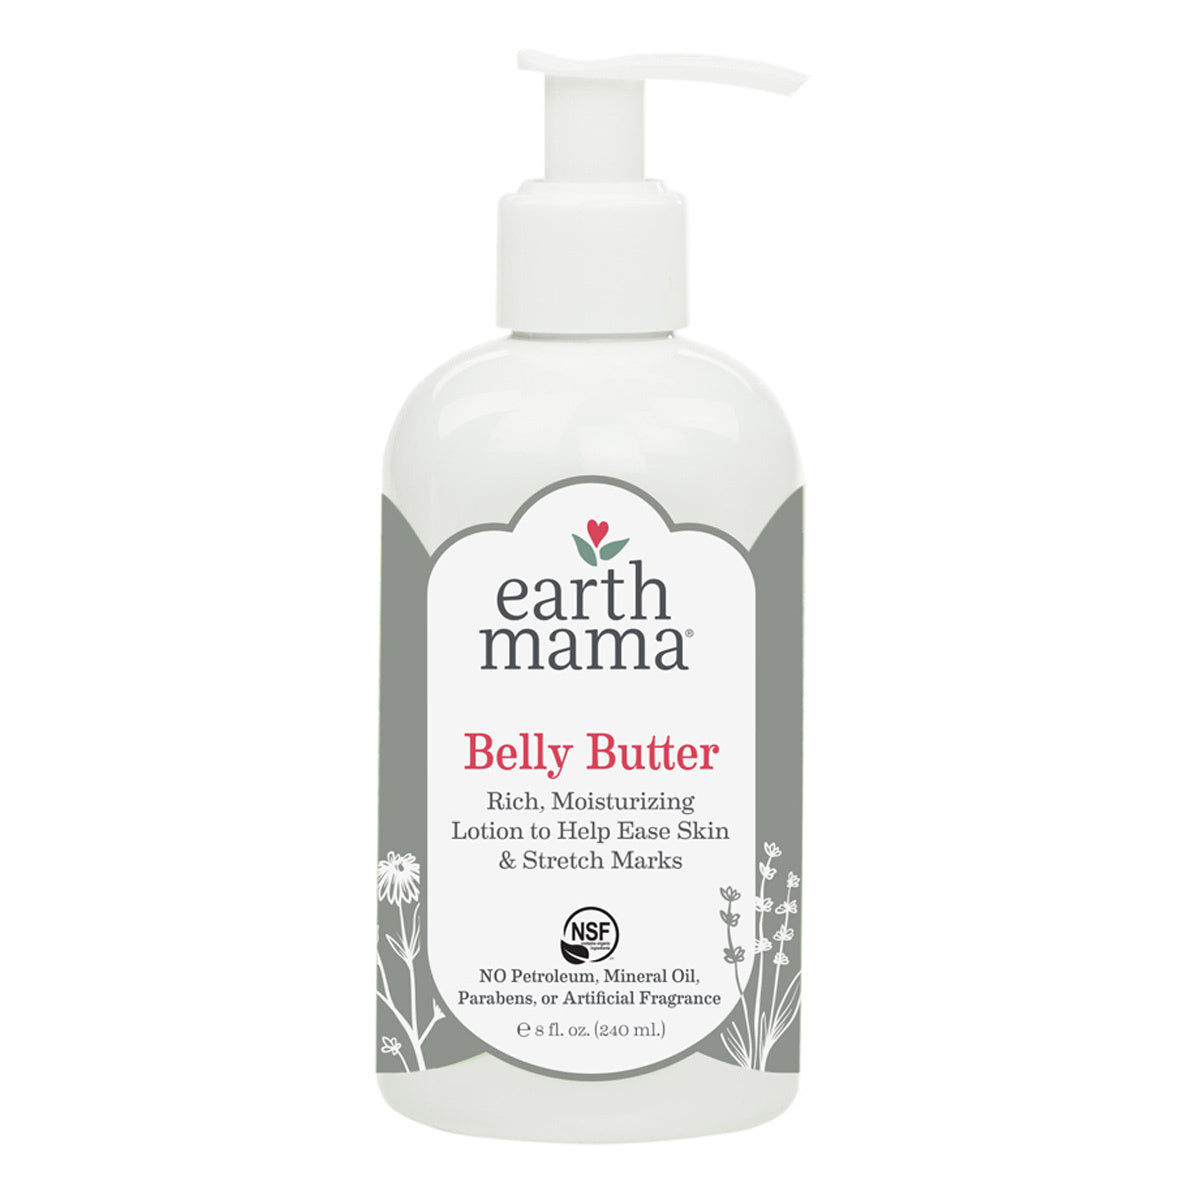 Primary image of Belly Butter